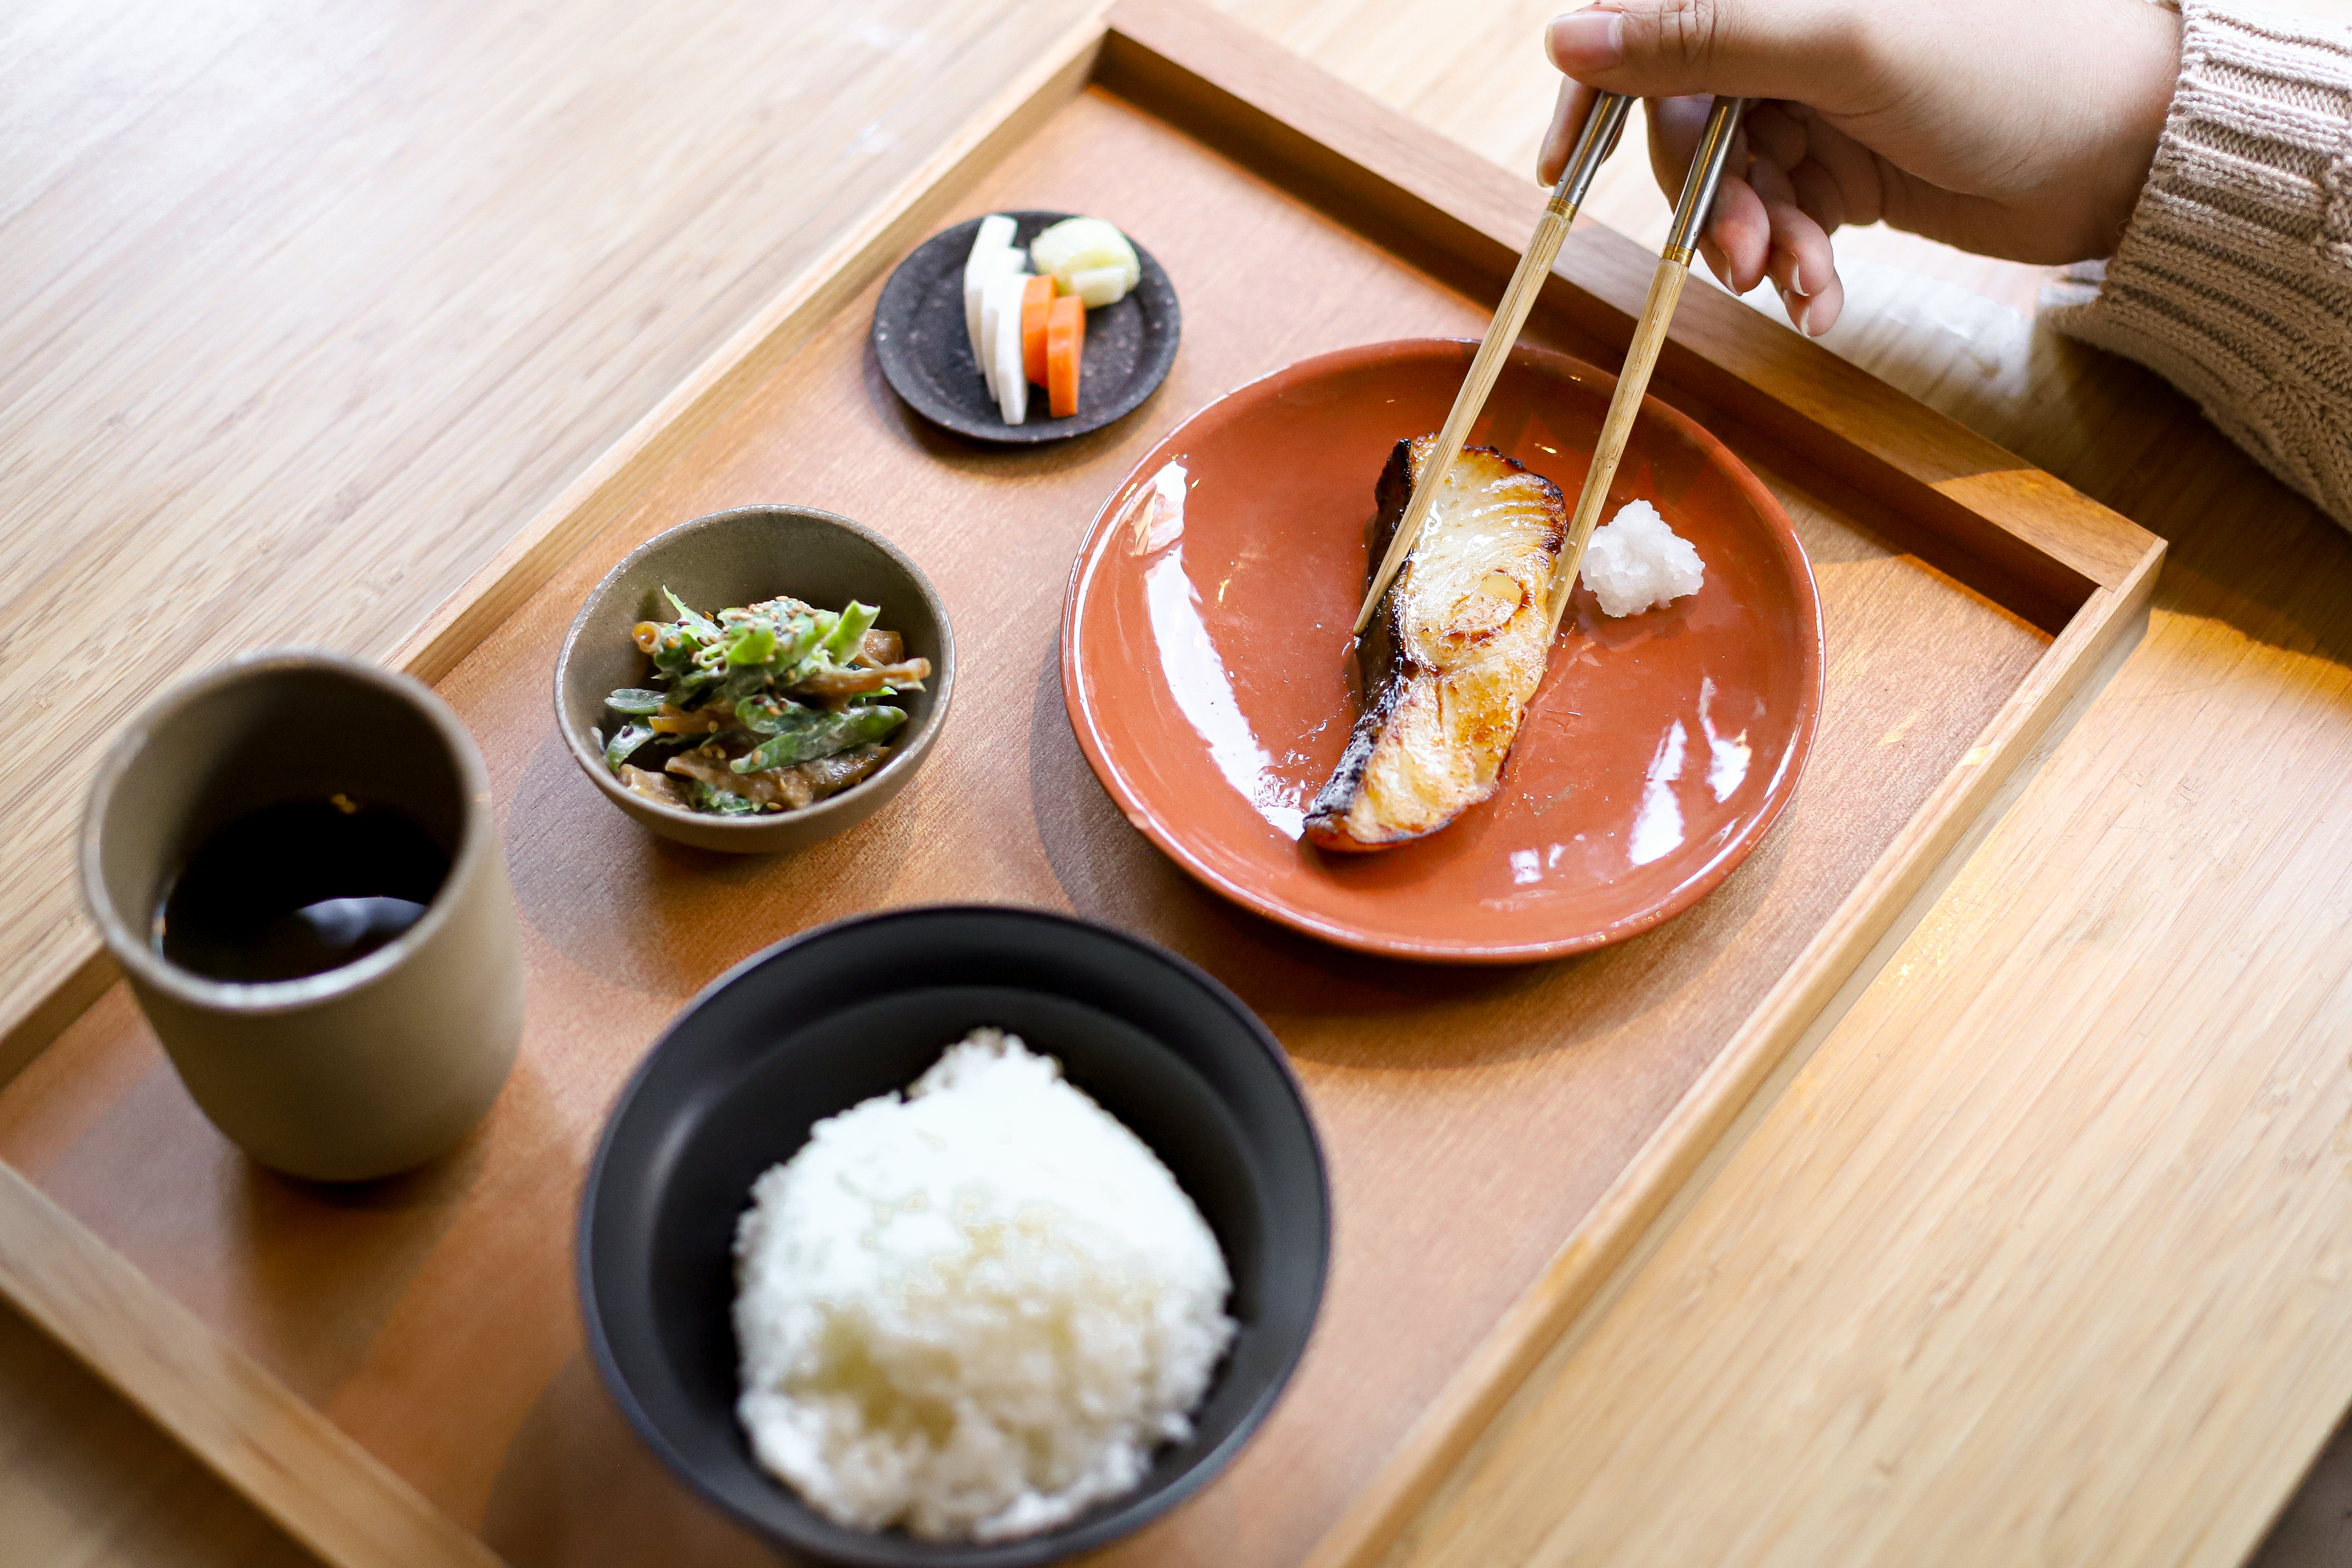 A piece of fish is picked up with a pair of chopsticks from a tray of food.